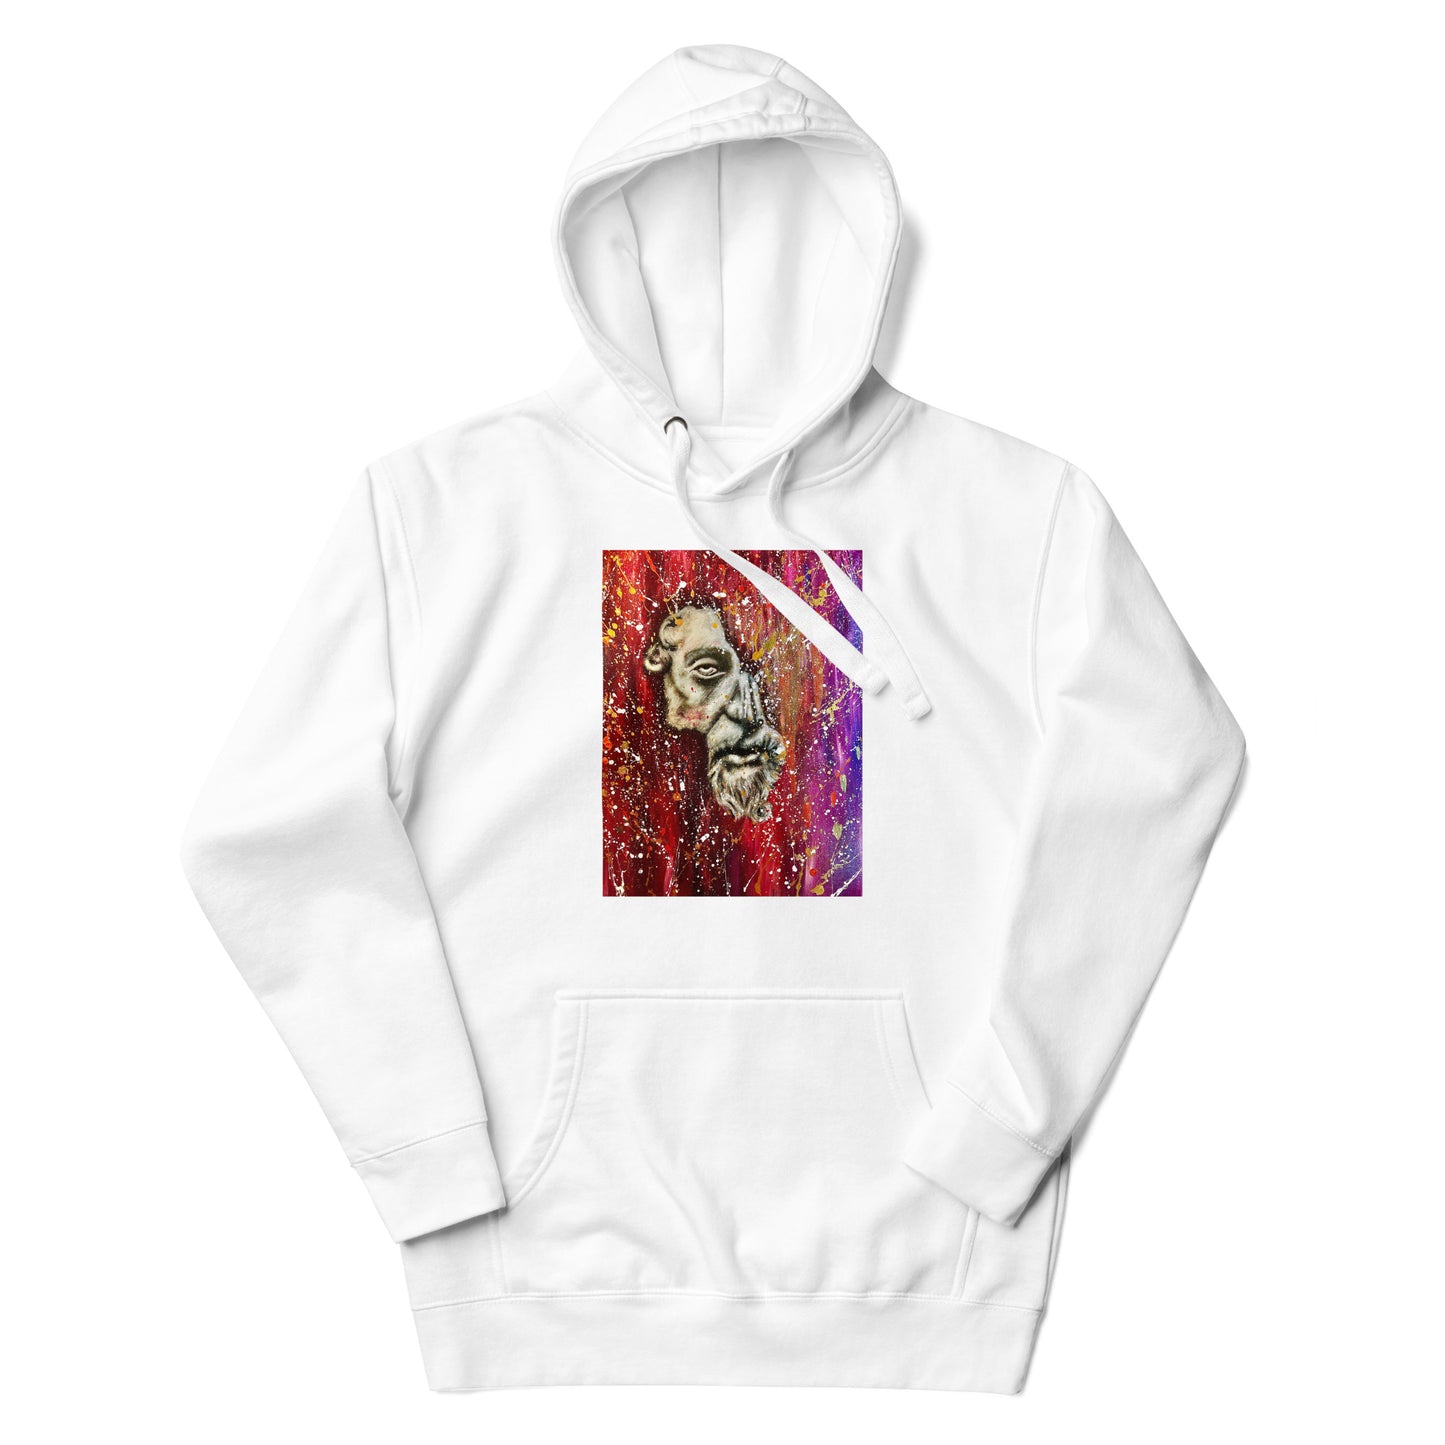 "The Soul Becomes..." Unisex Hoodie